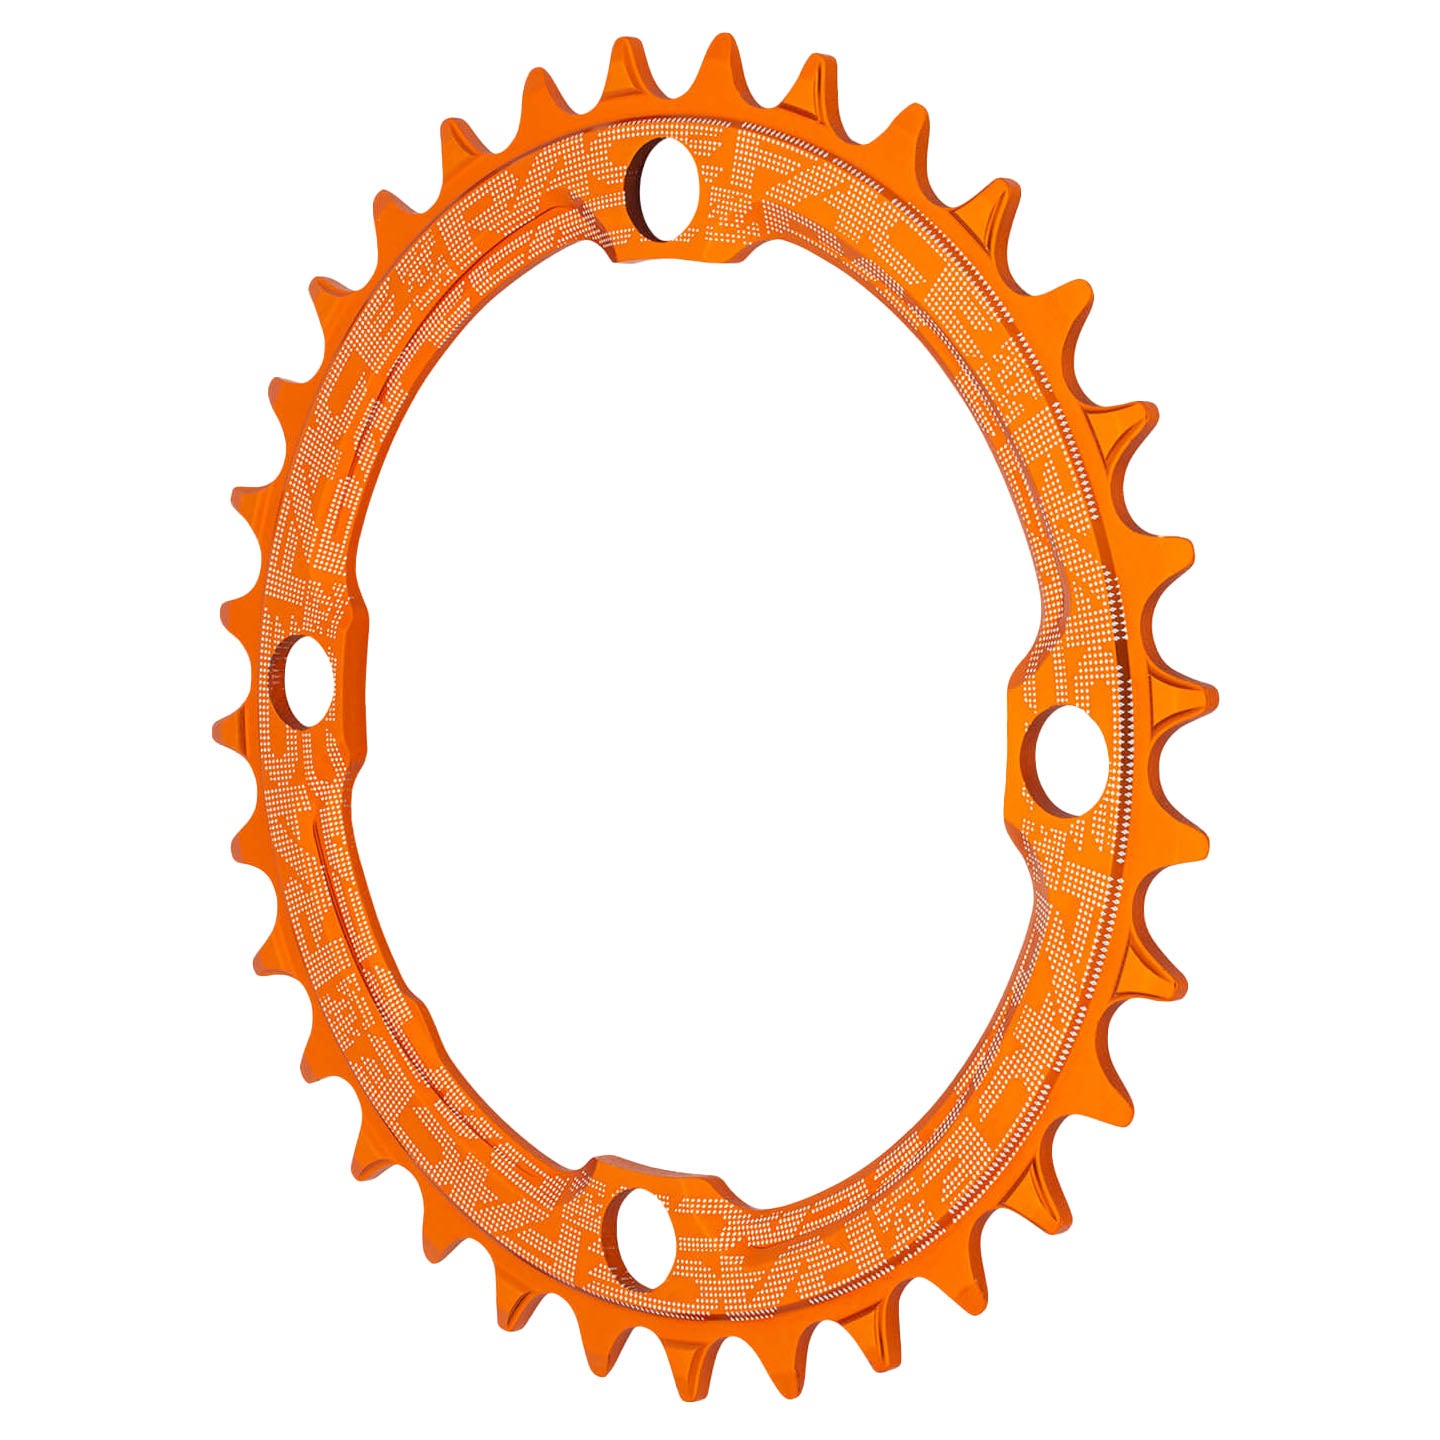 Race Face 104 NW Chainring 104BCD 32T Orange